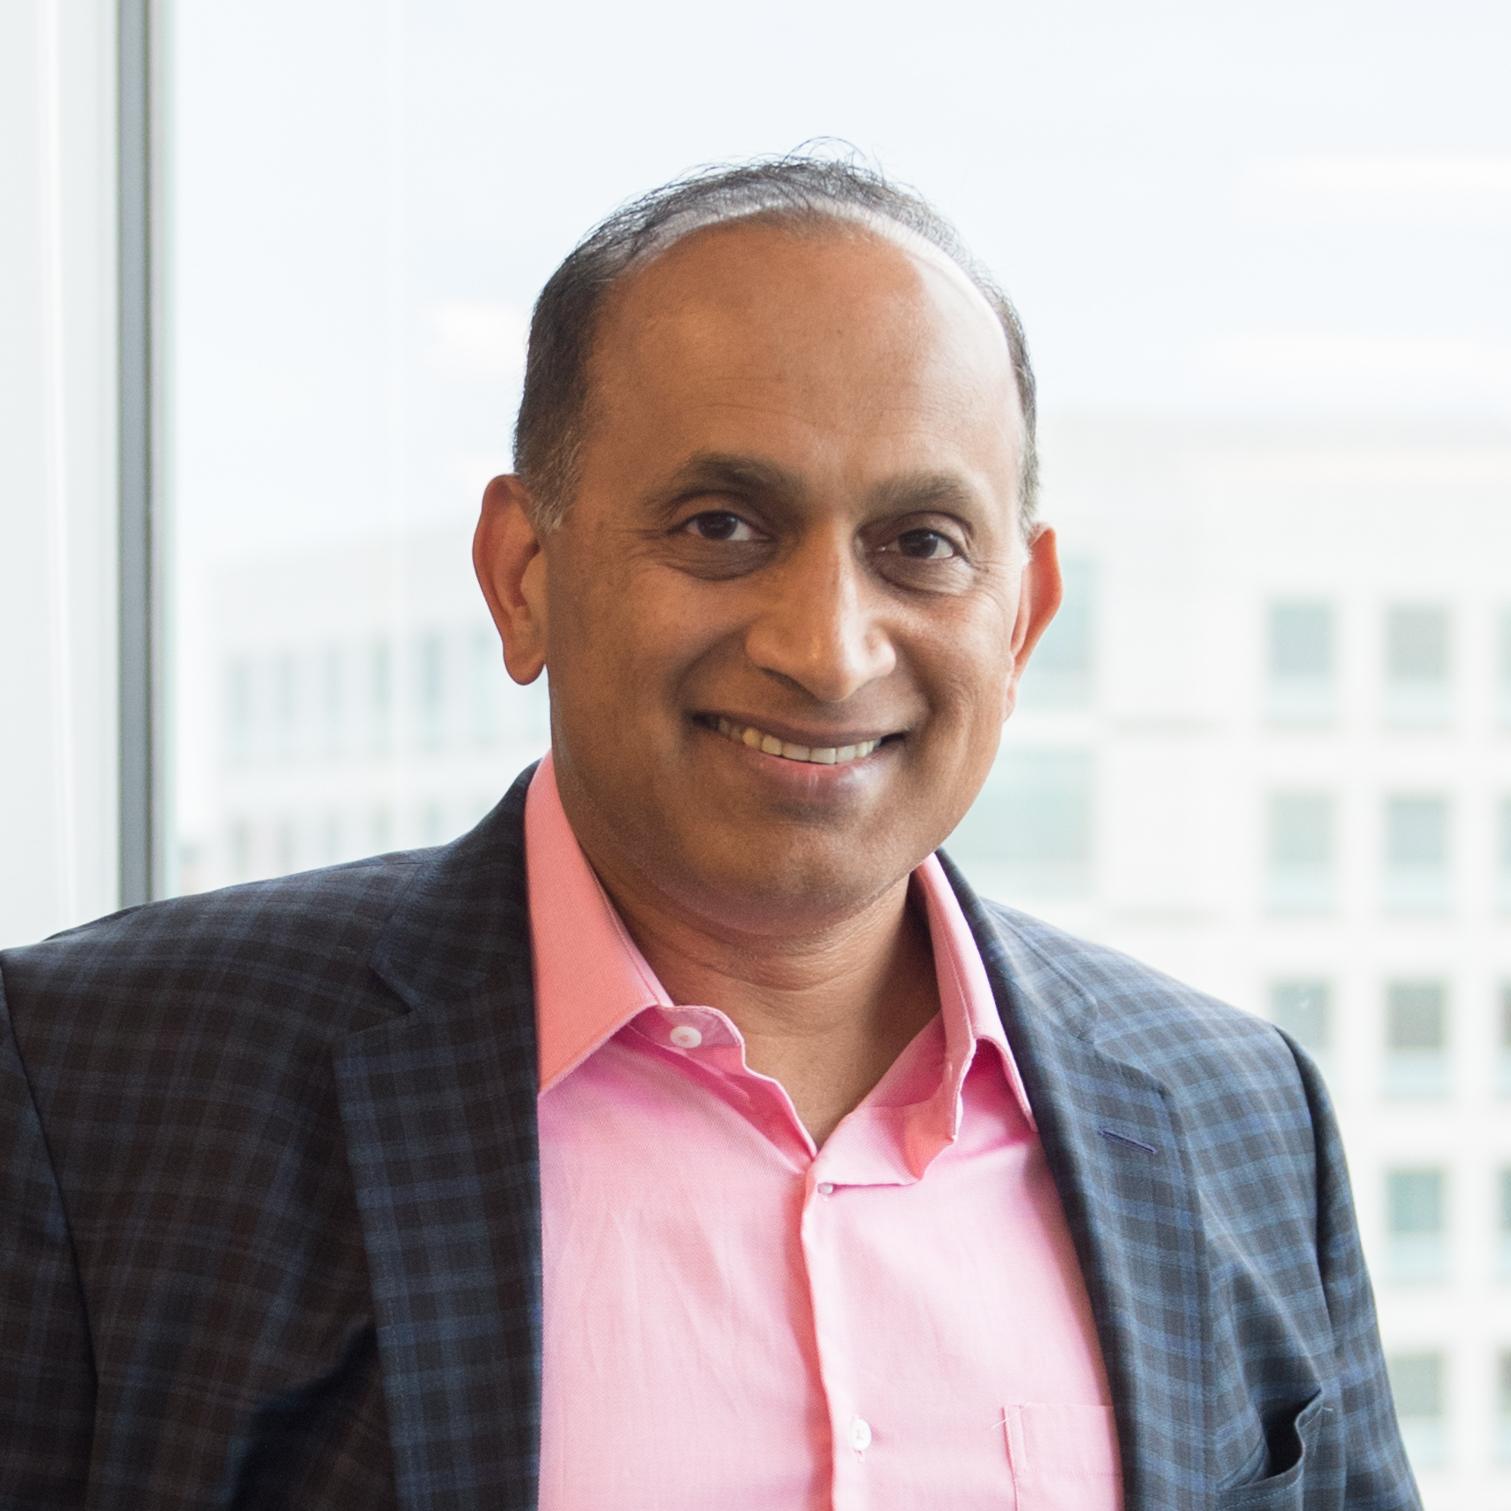 Sanjay Poonen
CEO and President, Cohesity